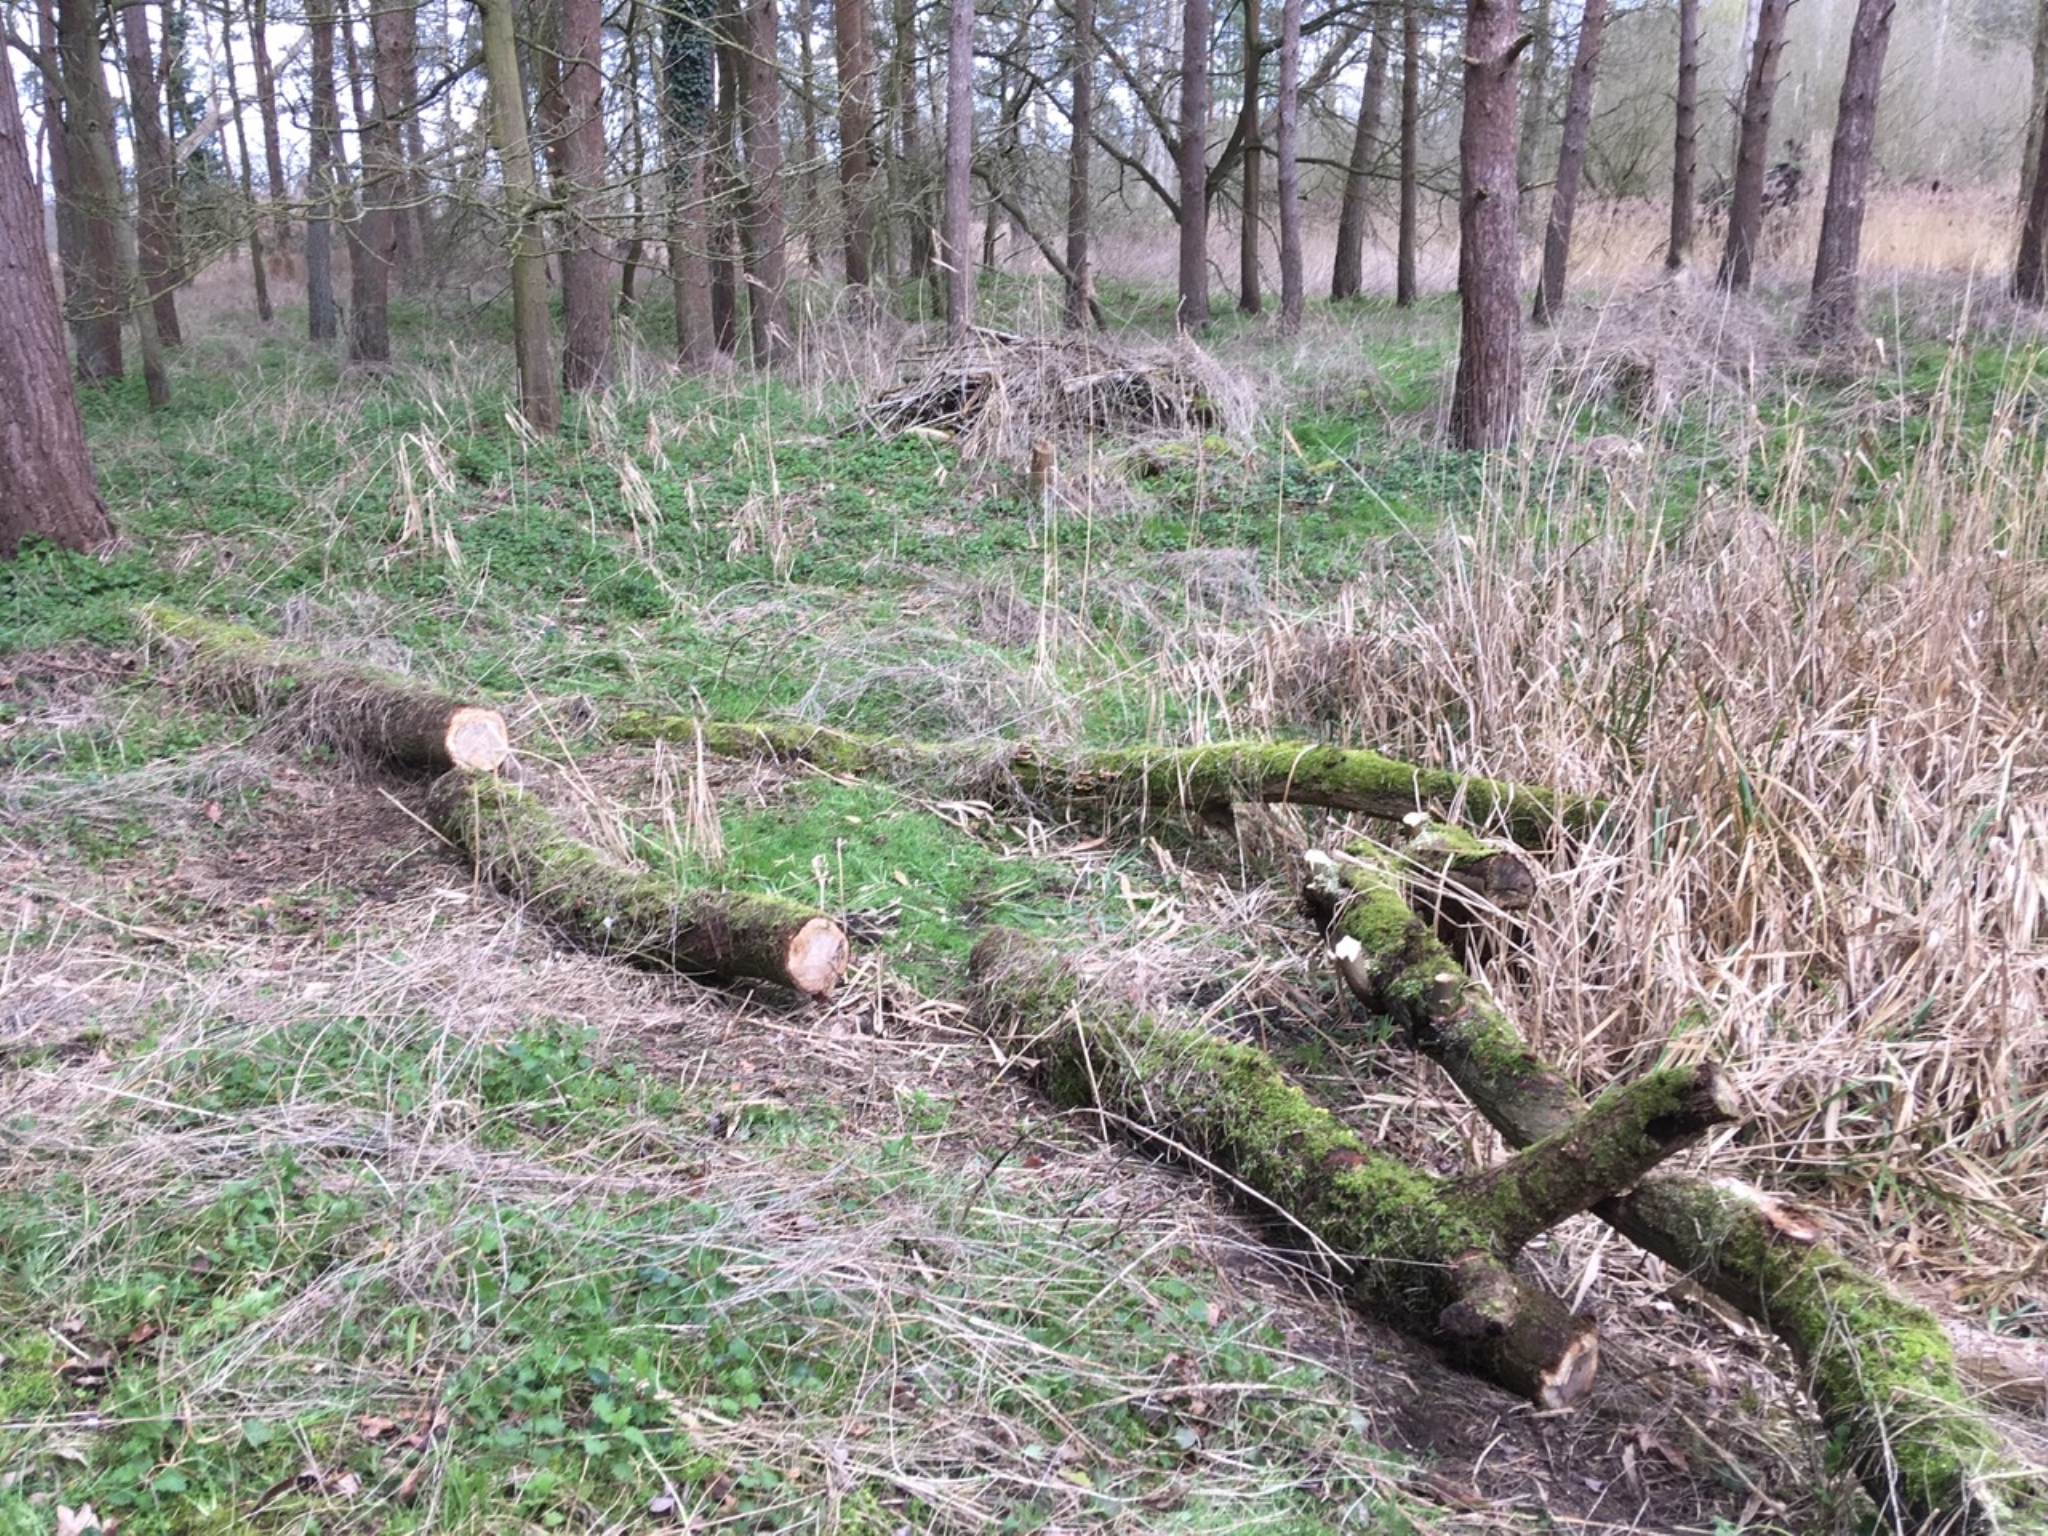 A photo from the FoTF Conservation Event - March 2019 - Clearance work around, and in, the ponds at Harling Woods, Harling : The remains of the fallen tree, now cut into segments